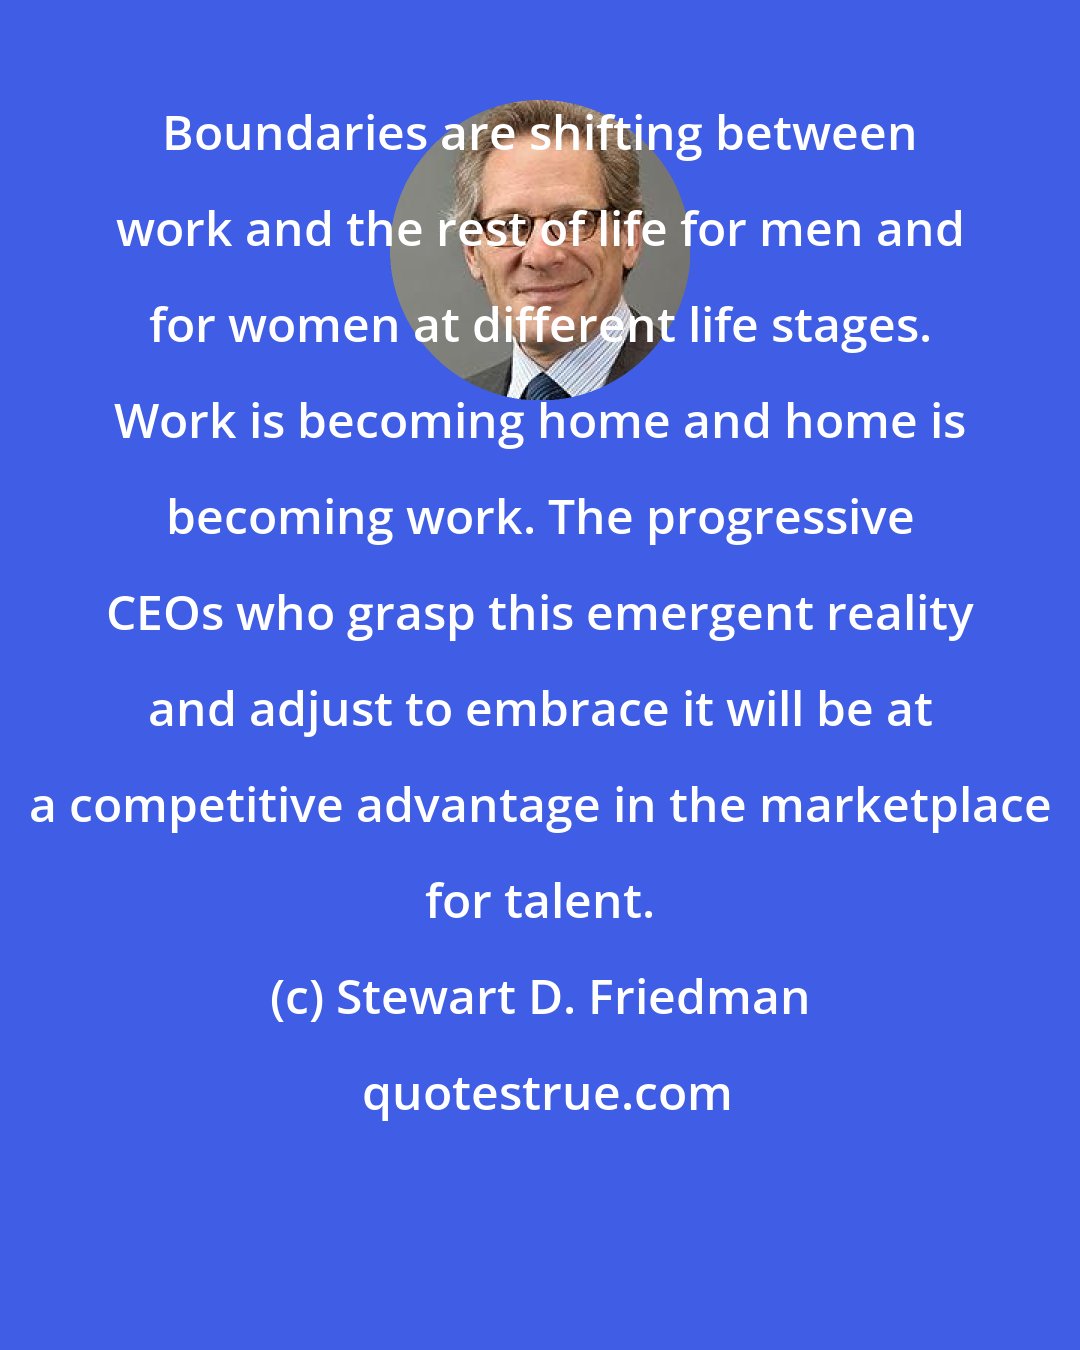 Stewart D. Friedman: Boundaries are shifting between work and the rest of life for men and for women at different life stages. Work is becoming home and home is becoming work. The progressive CEOs who grasp this emergent reality and adjust to embrace it will be at a competitive advantage in the marketplace for talent.